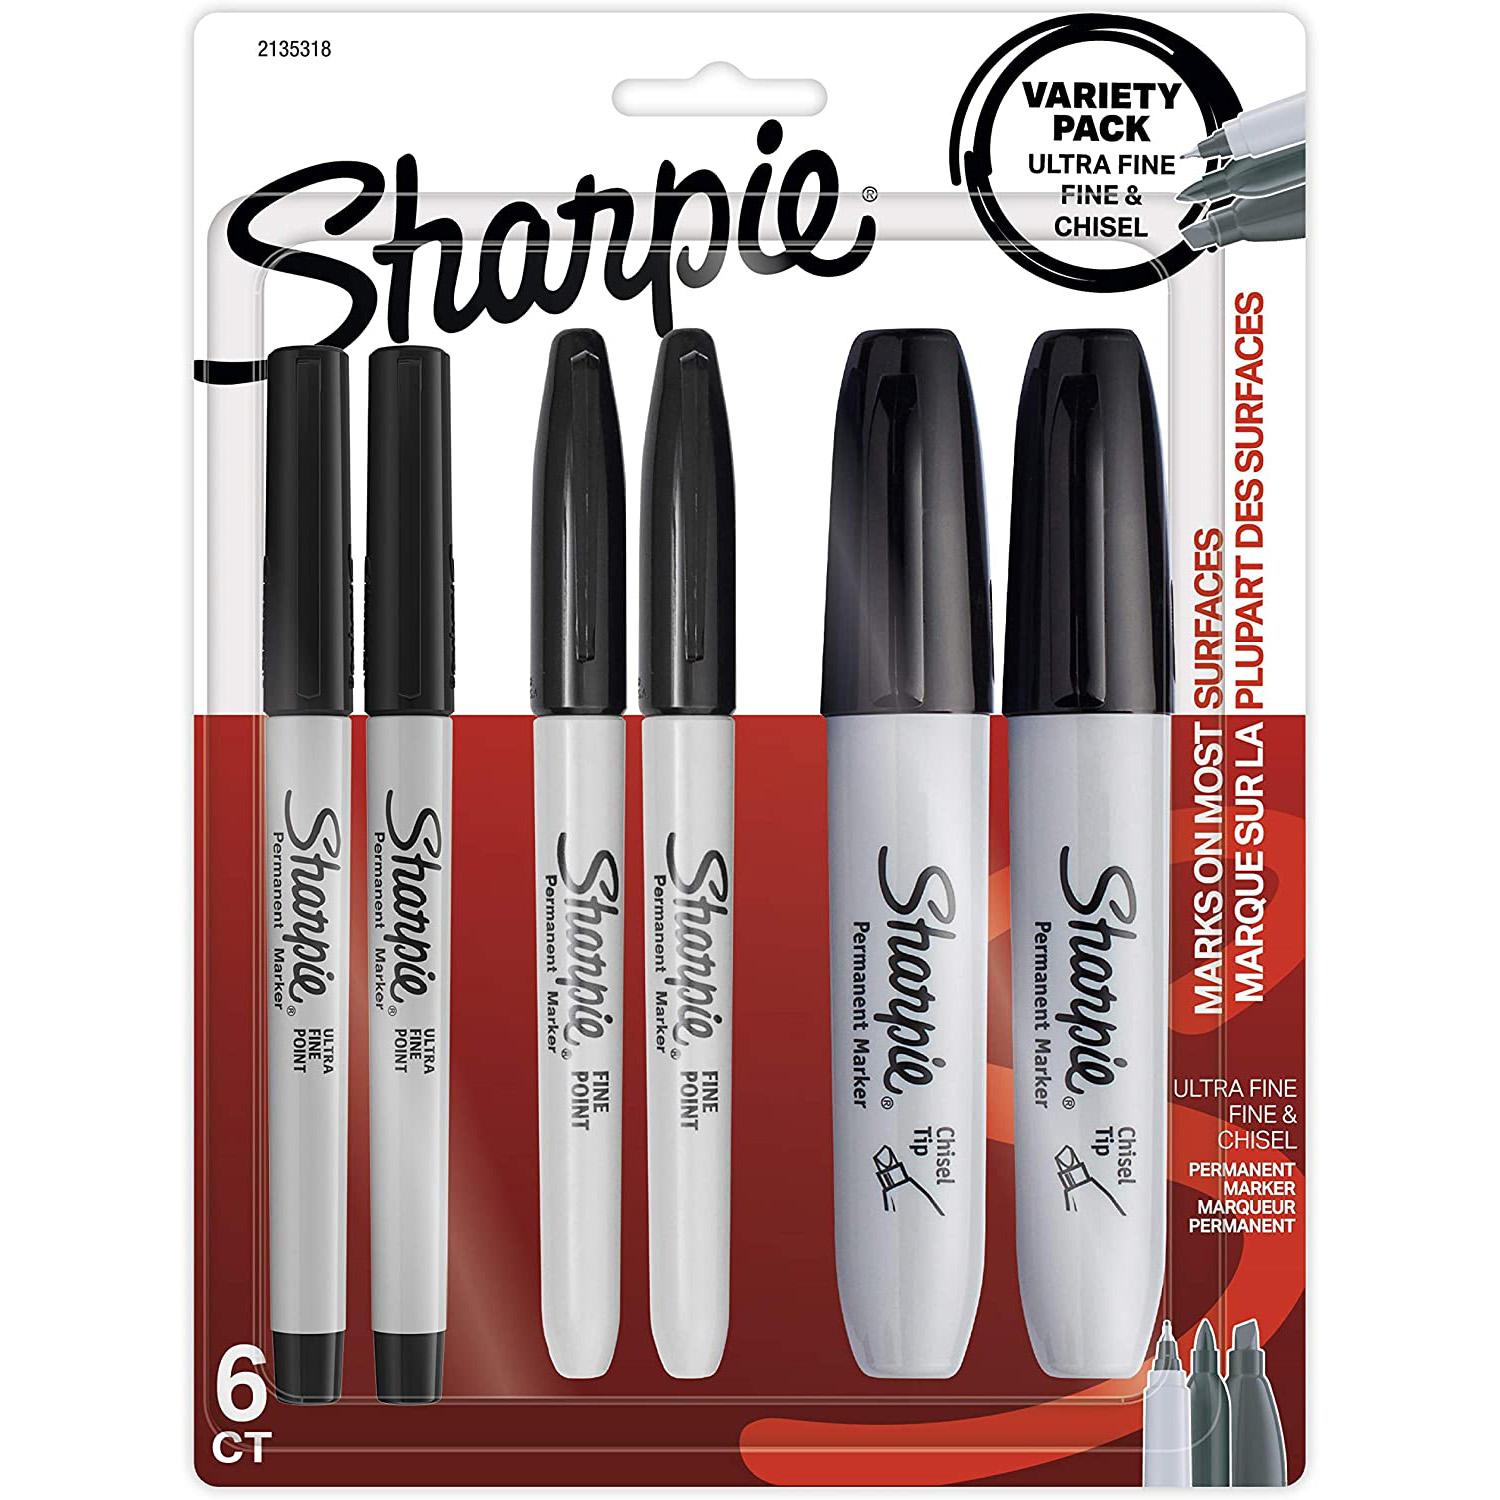 6 Sharpie Permanent Markers Variety Pack for $4.98 Shipped